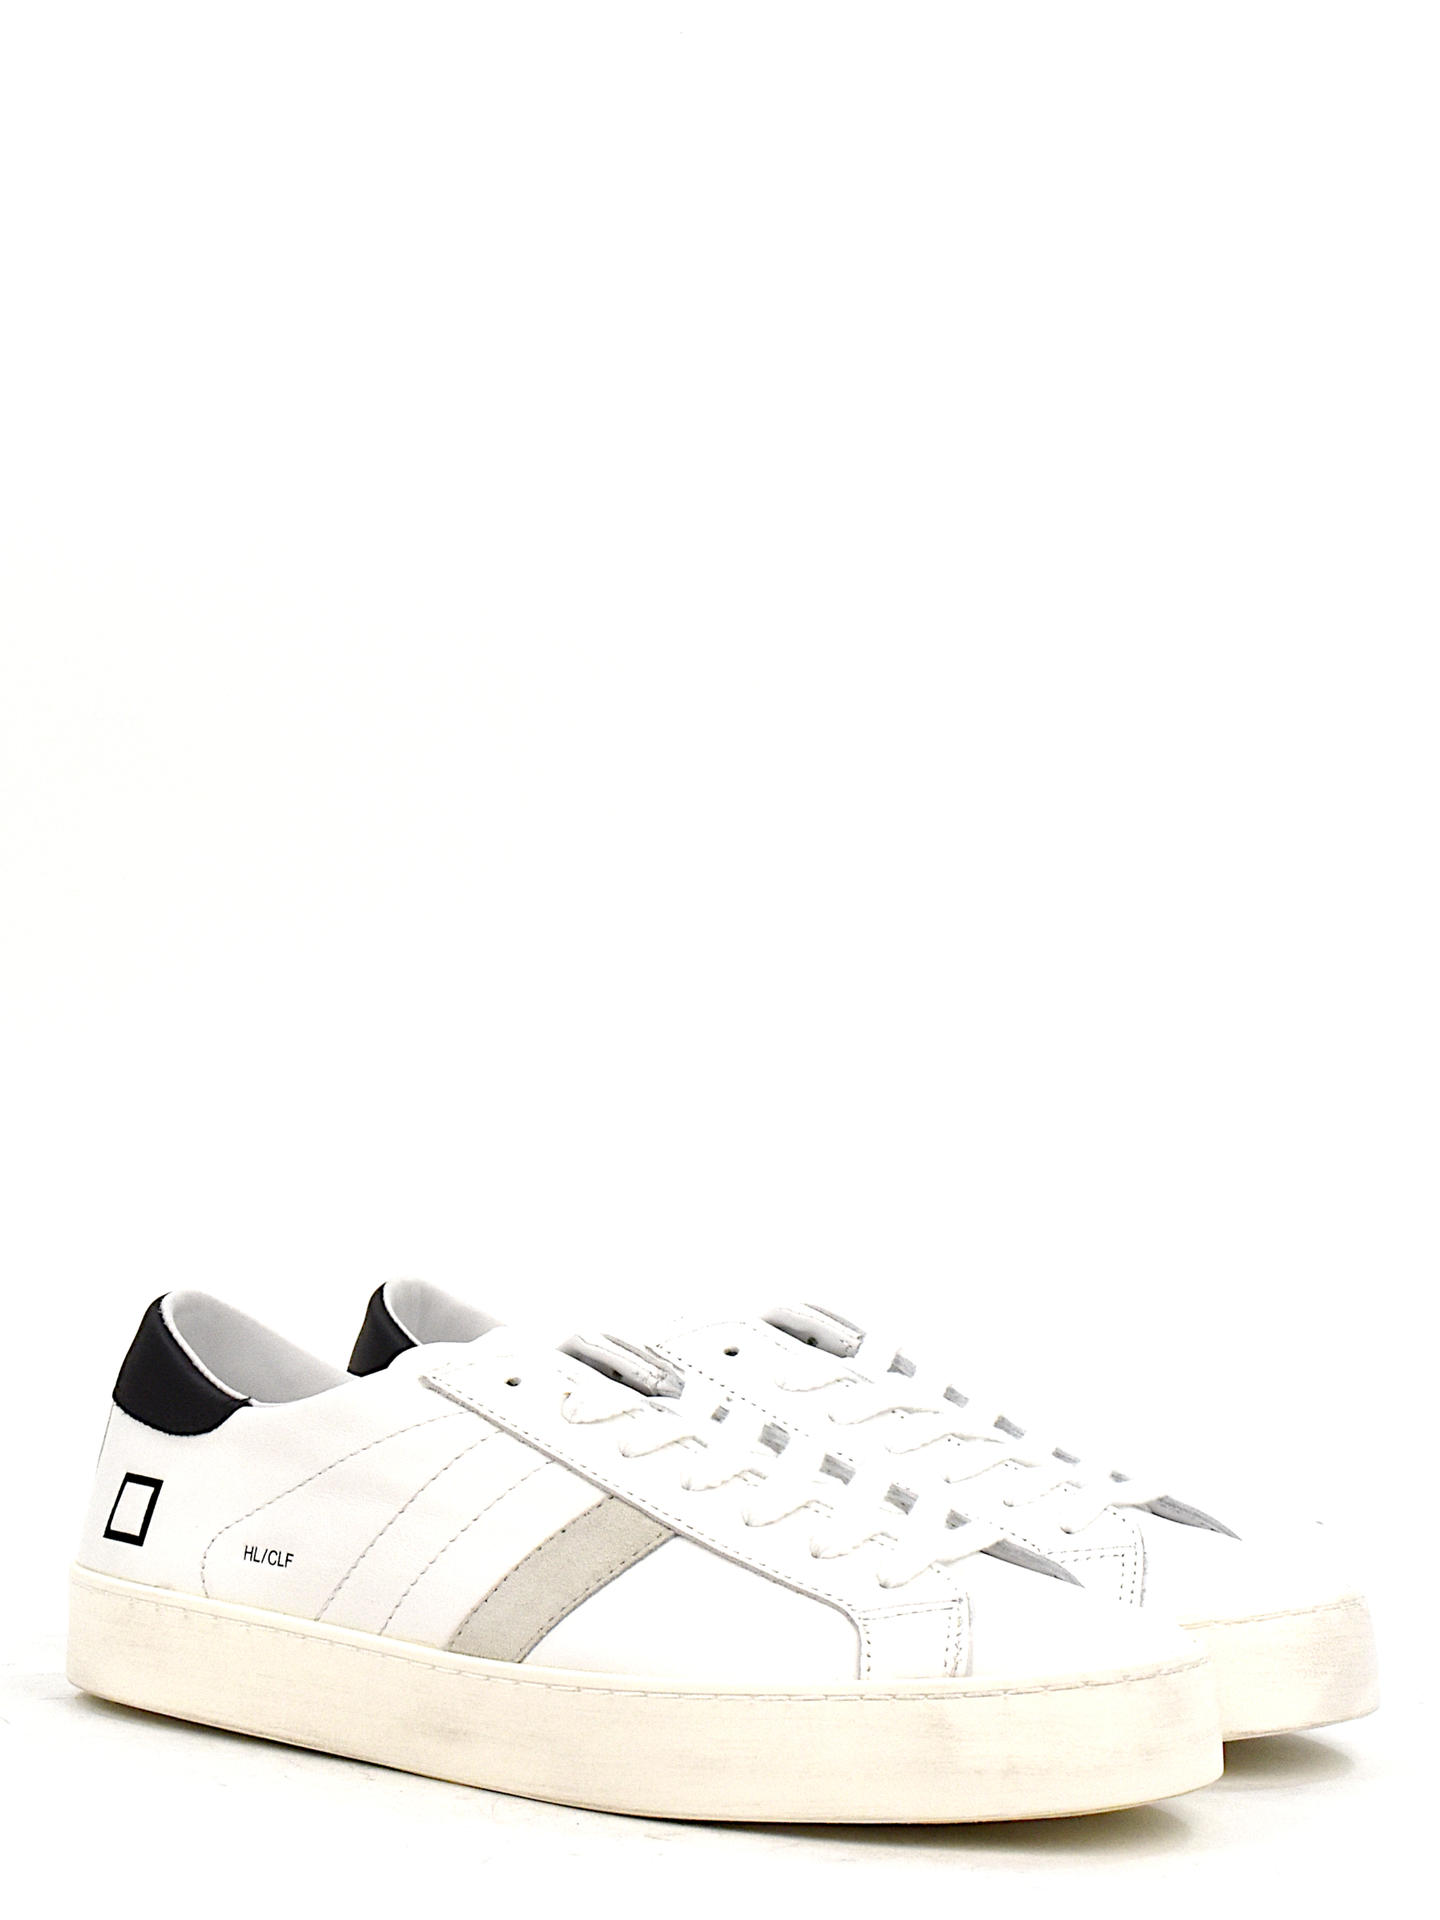 SNEAKERS D.A.T.E HLCAWBWB BIANCO/NERO